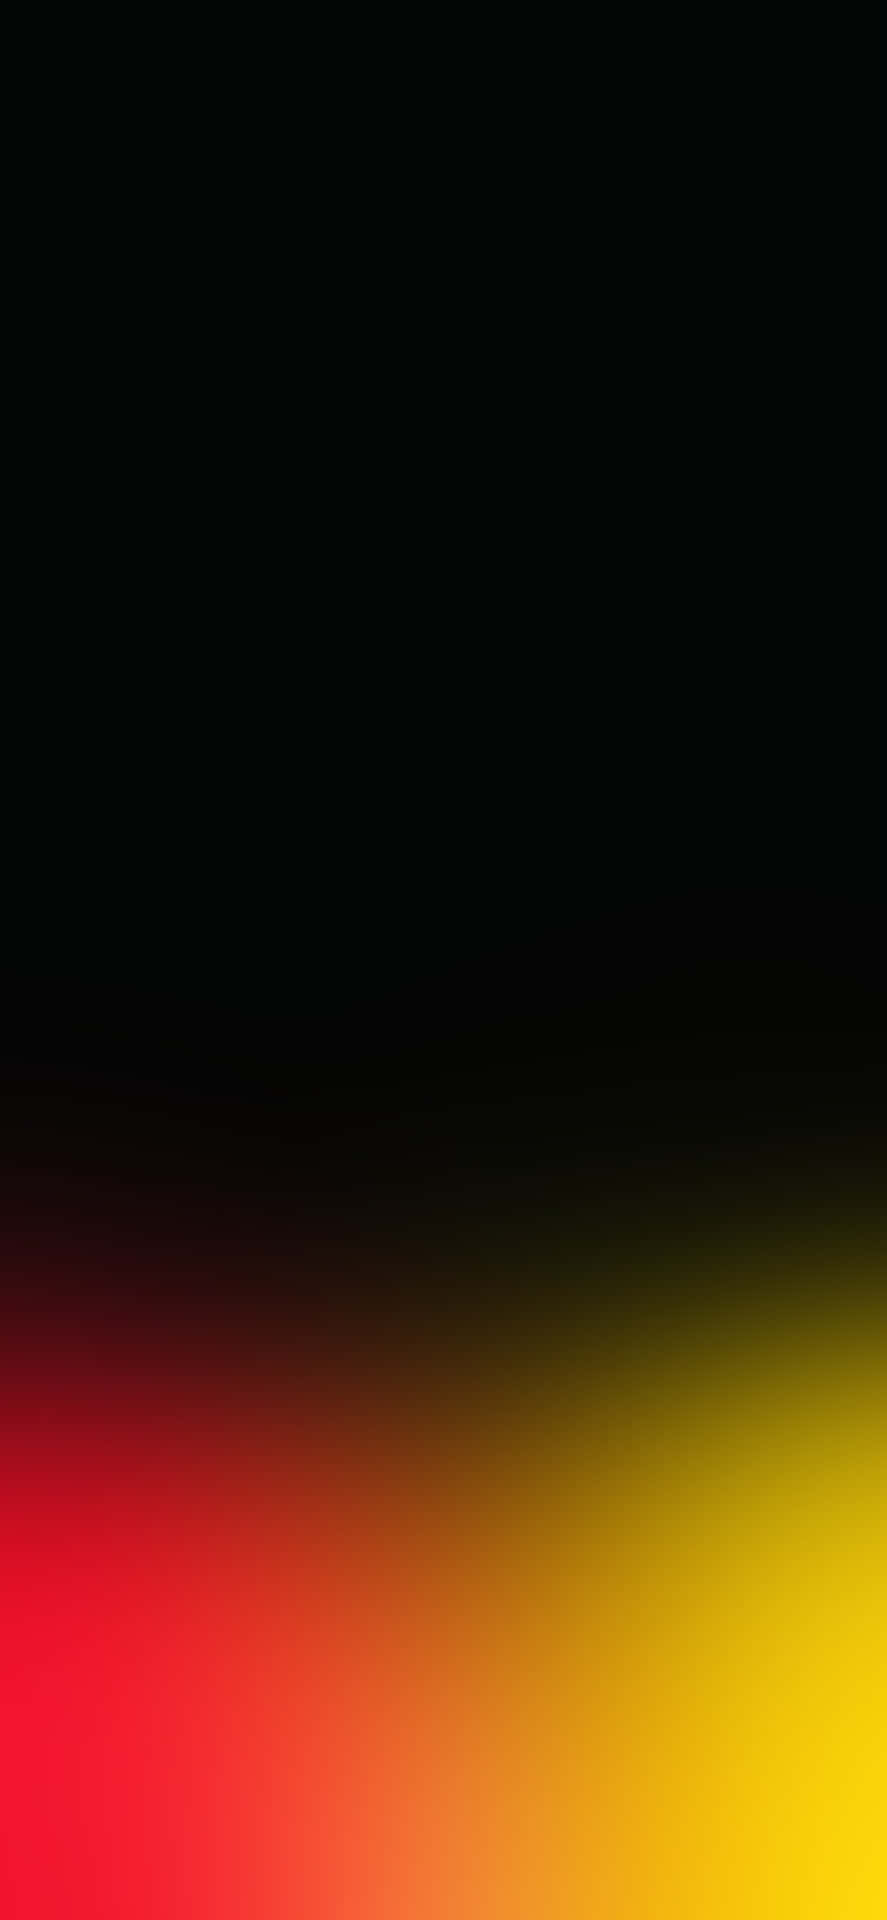 Get your hands on the newest and most stylish phone on the market - the Gradient Iphone Wallpaper